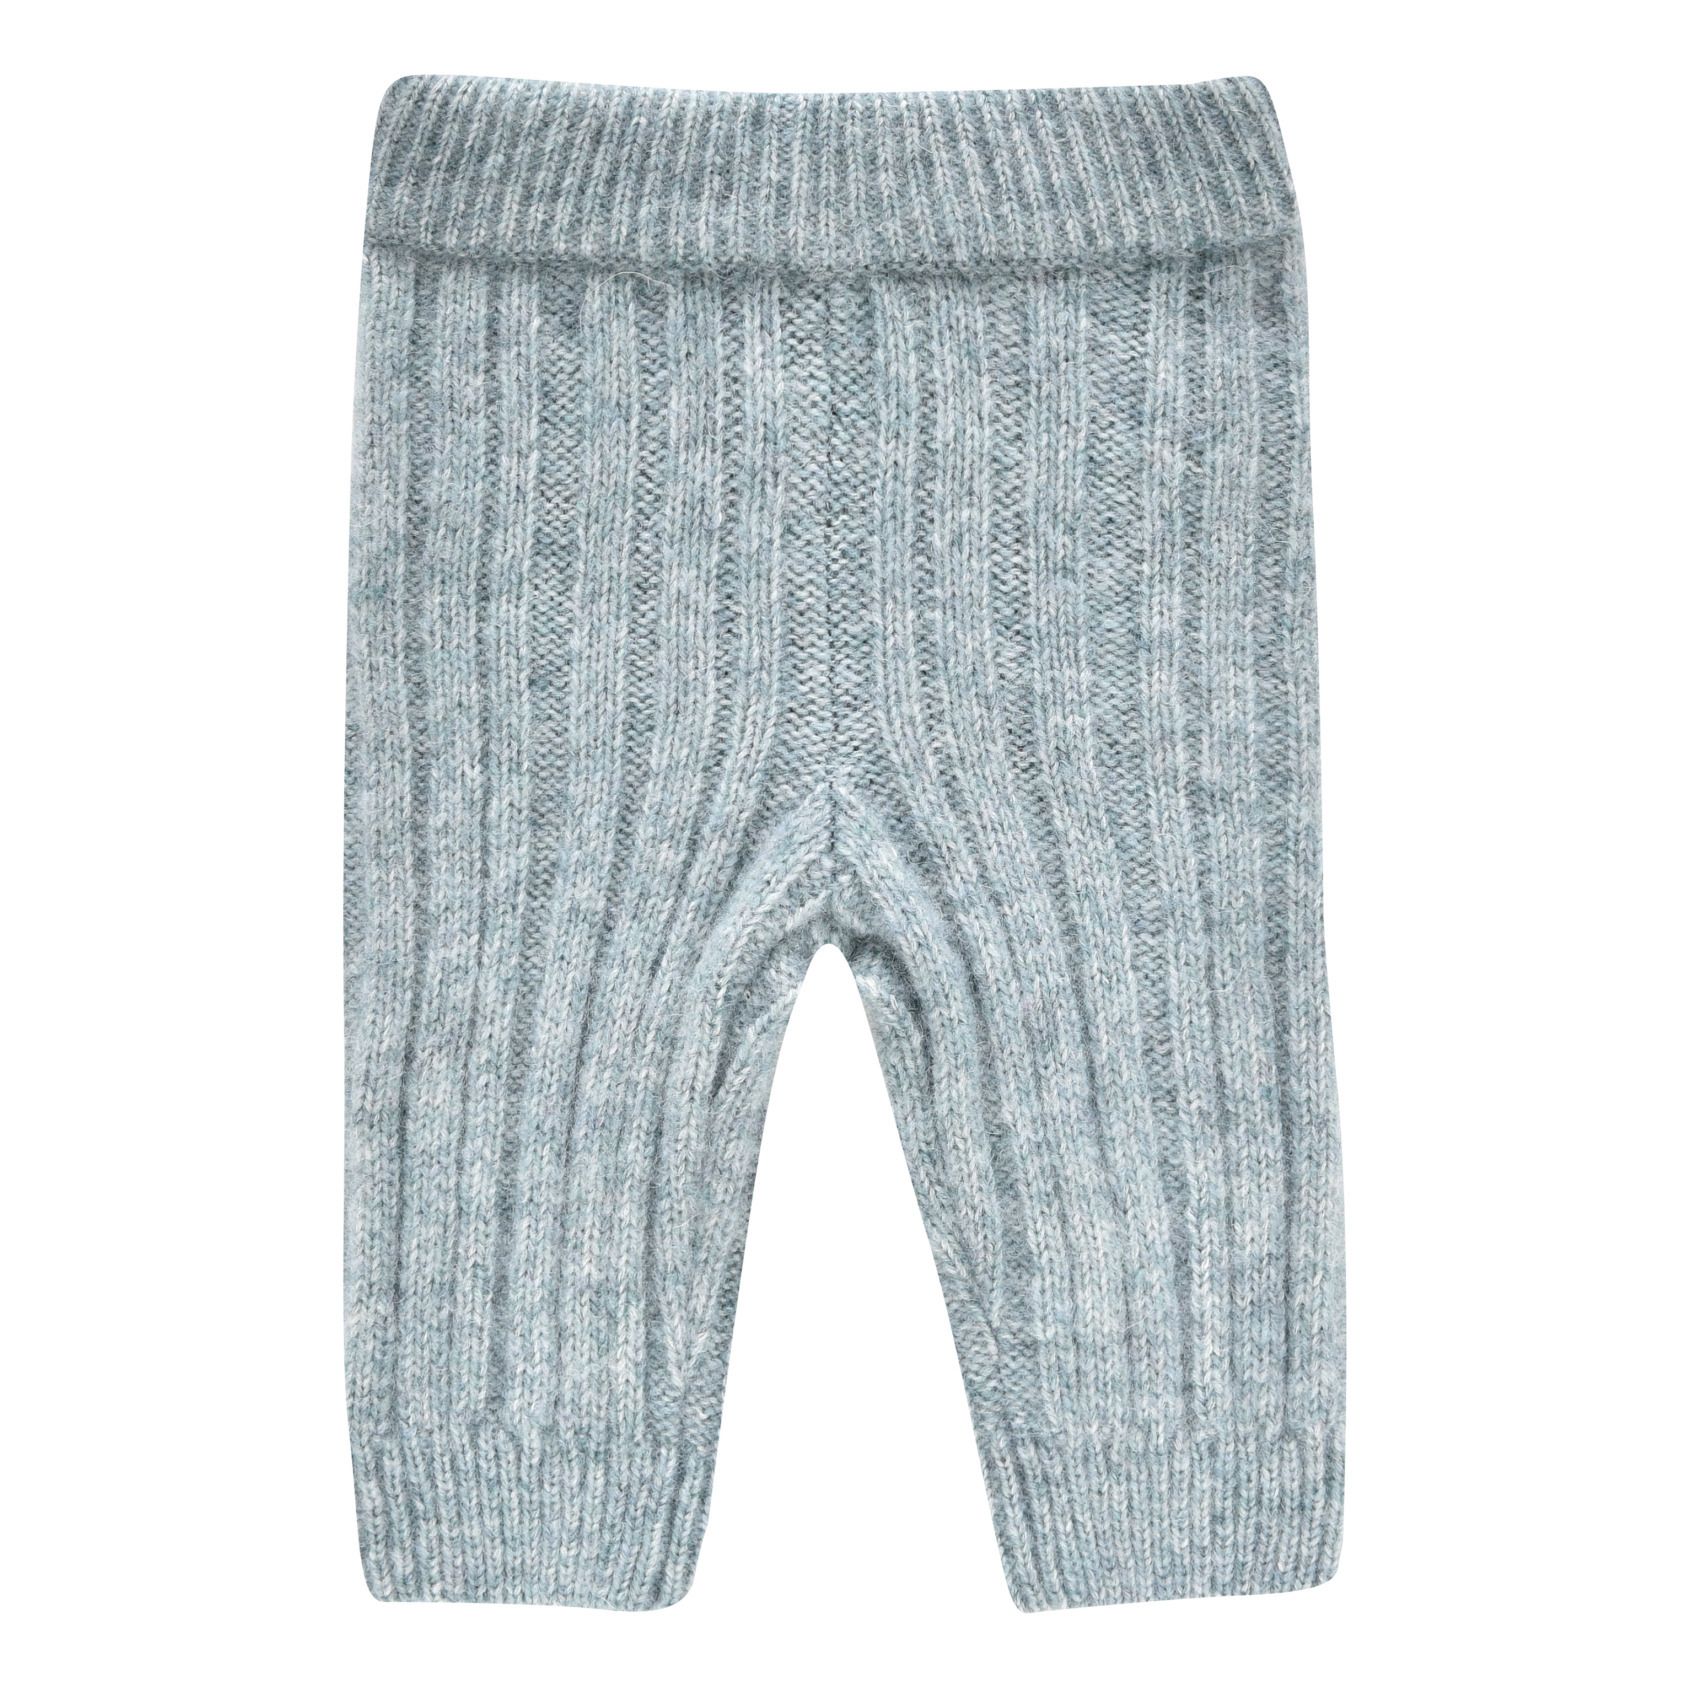 Grey Cable Knit Leggings